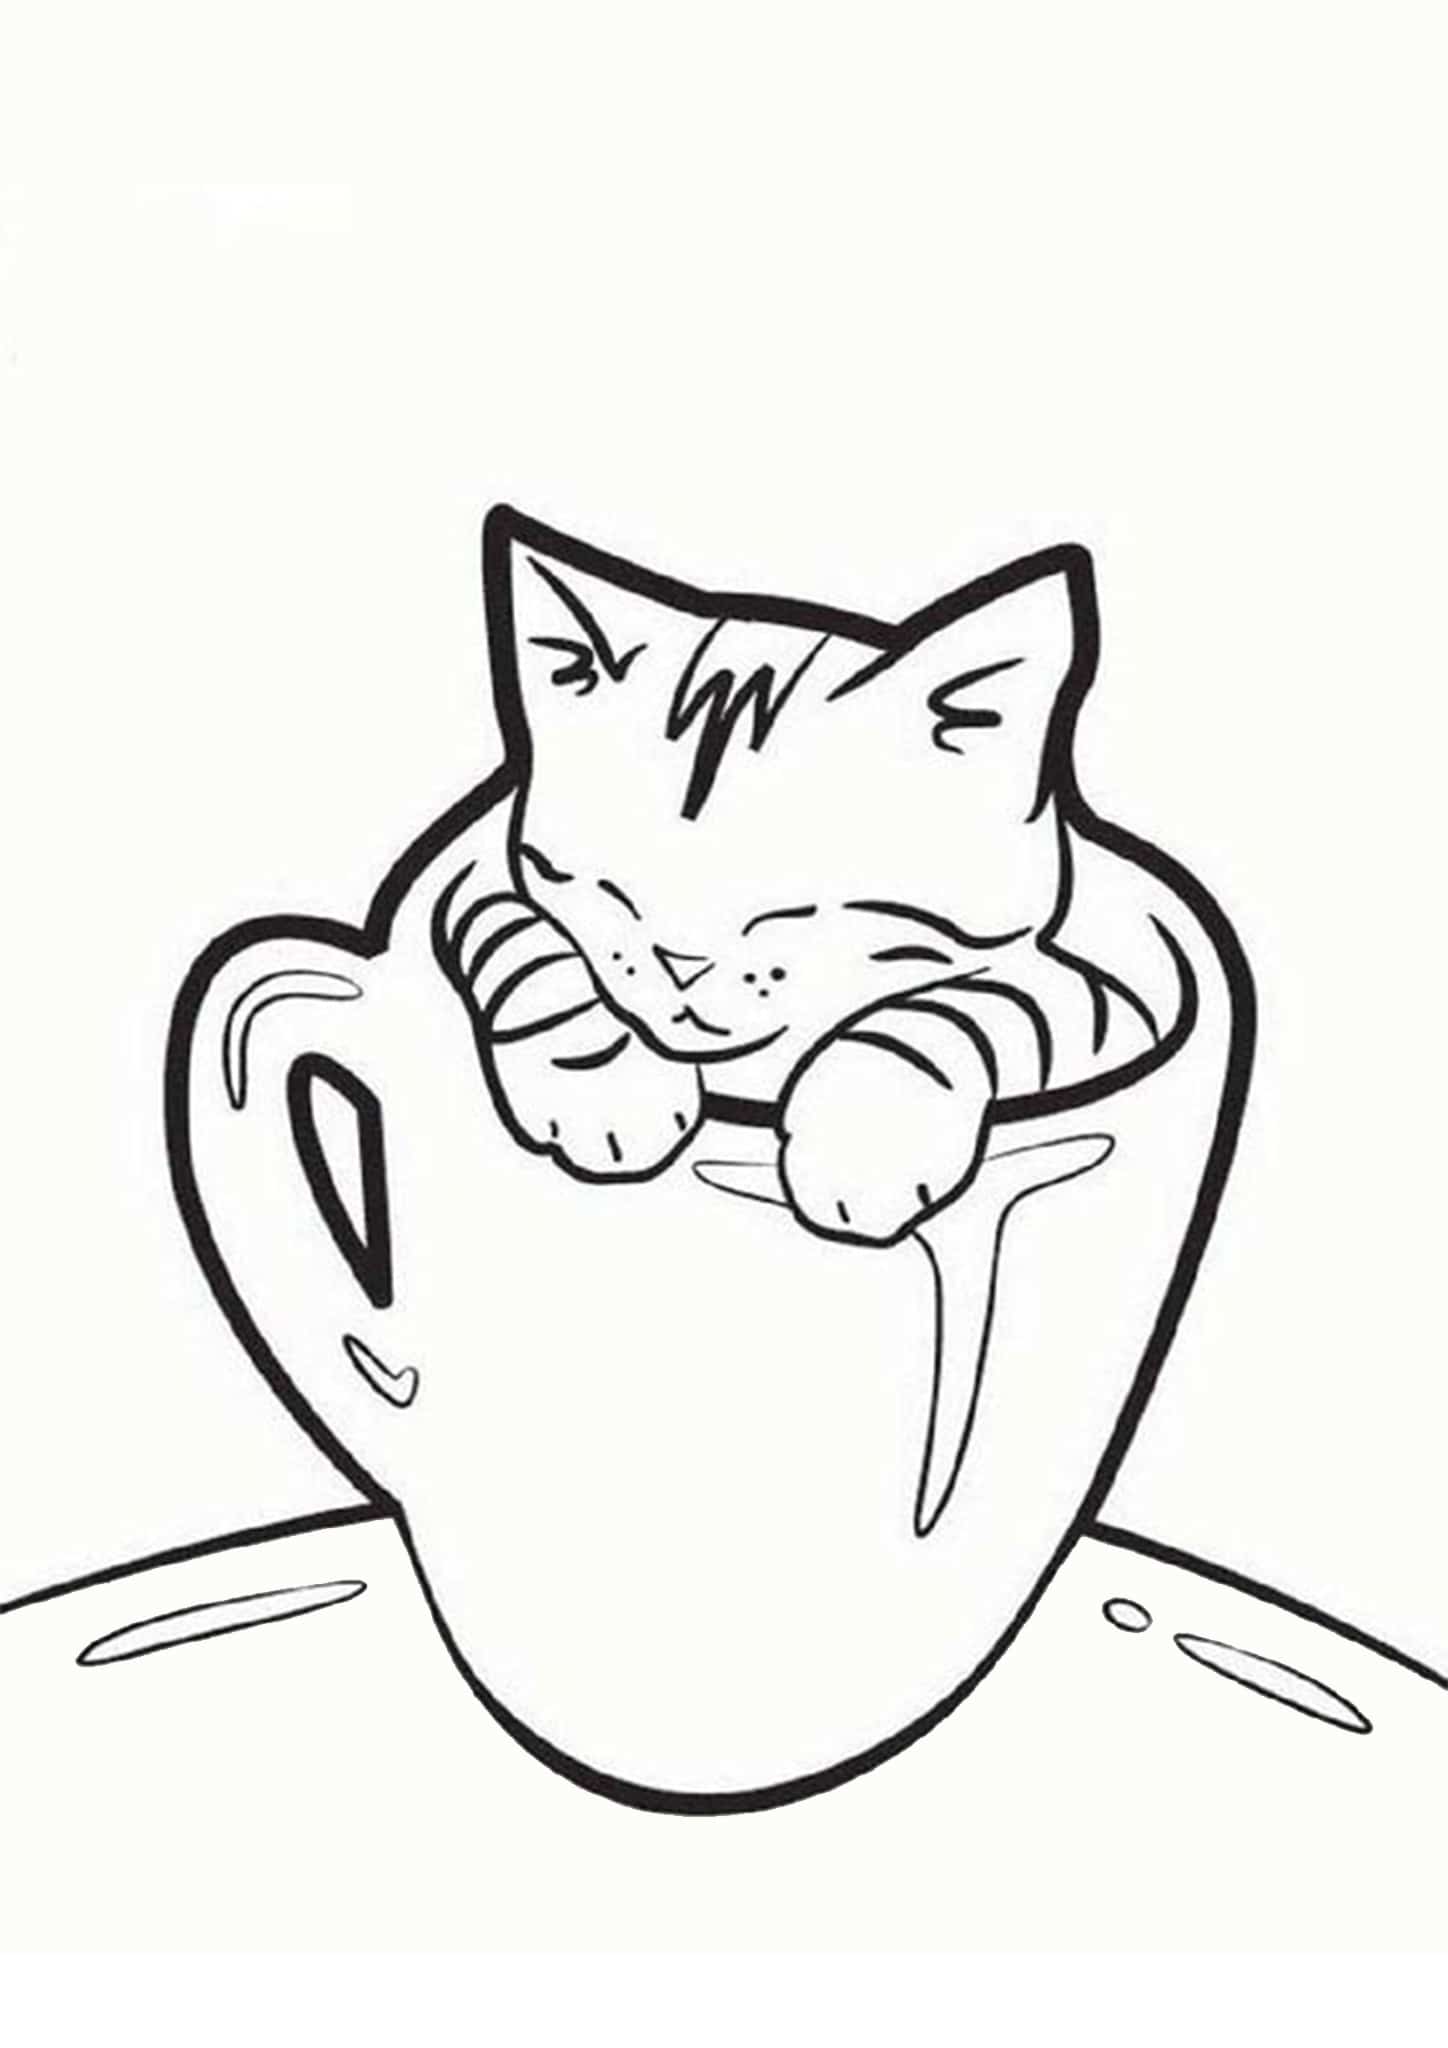 Free Printable Kitten Coloring Pages - Printable Templates